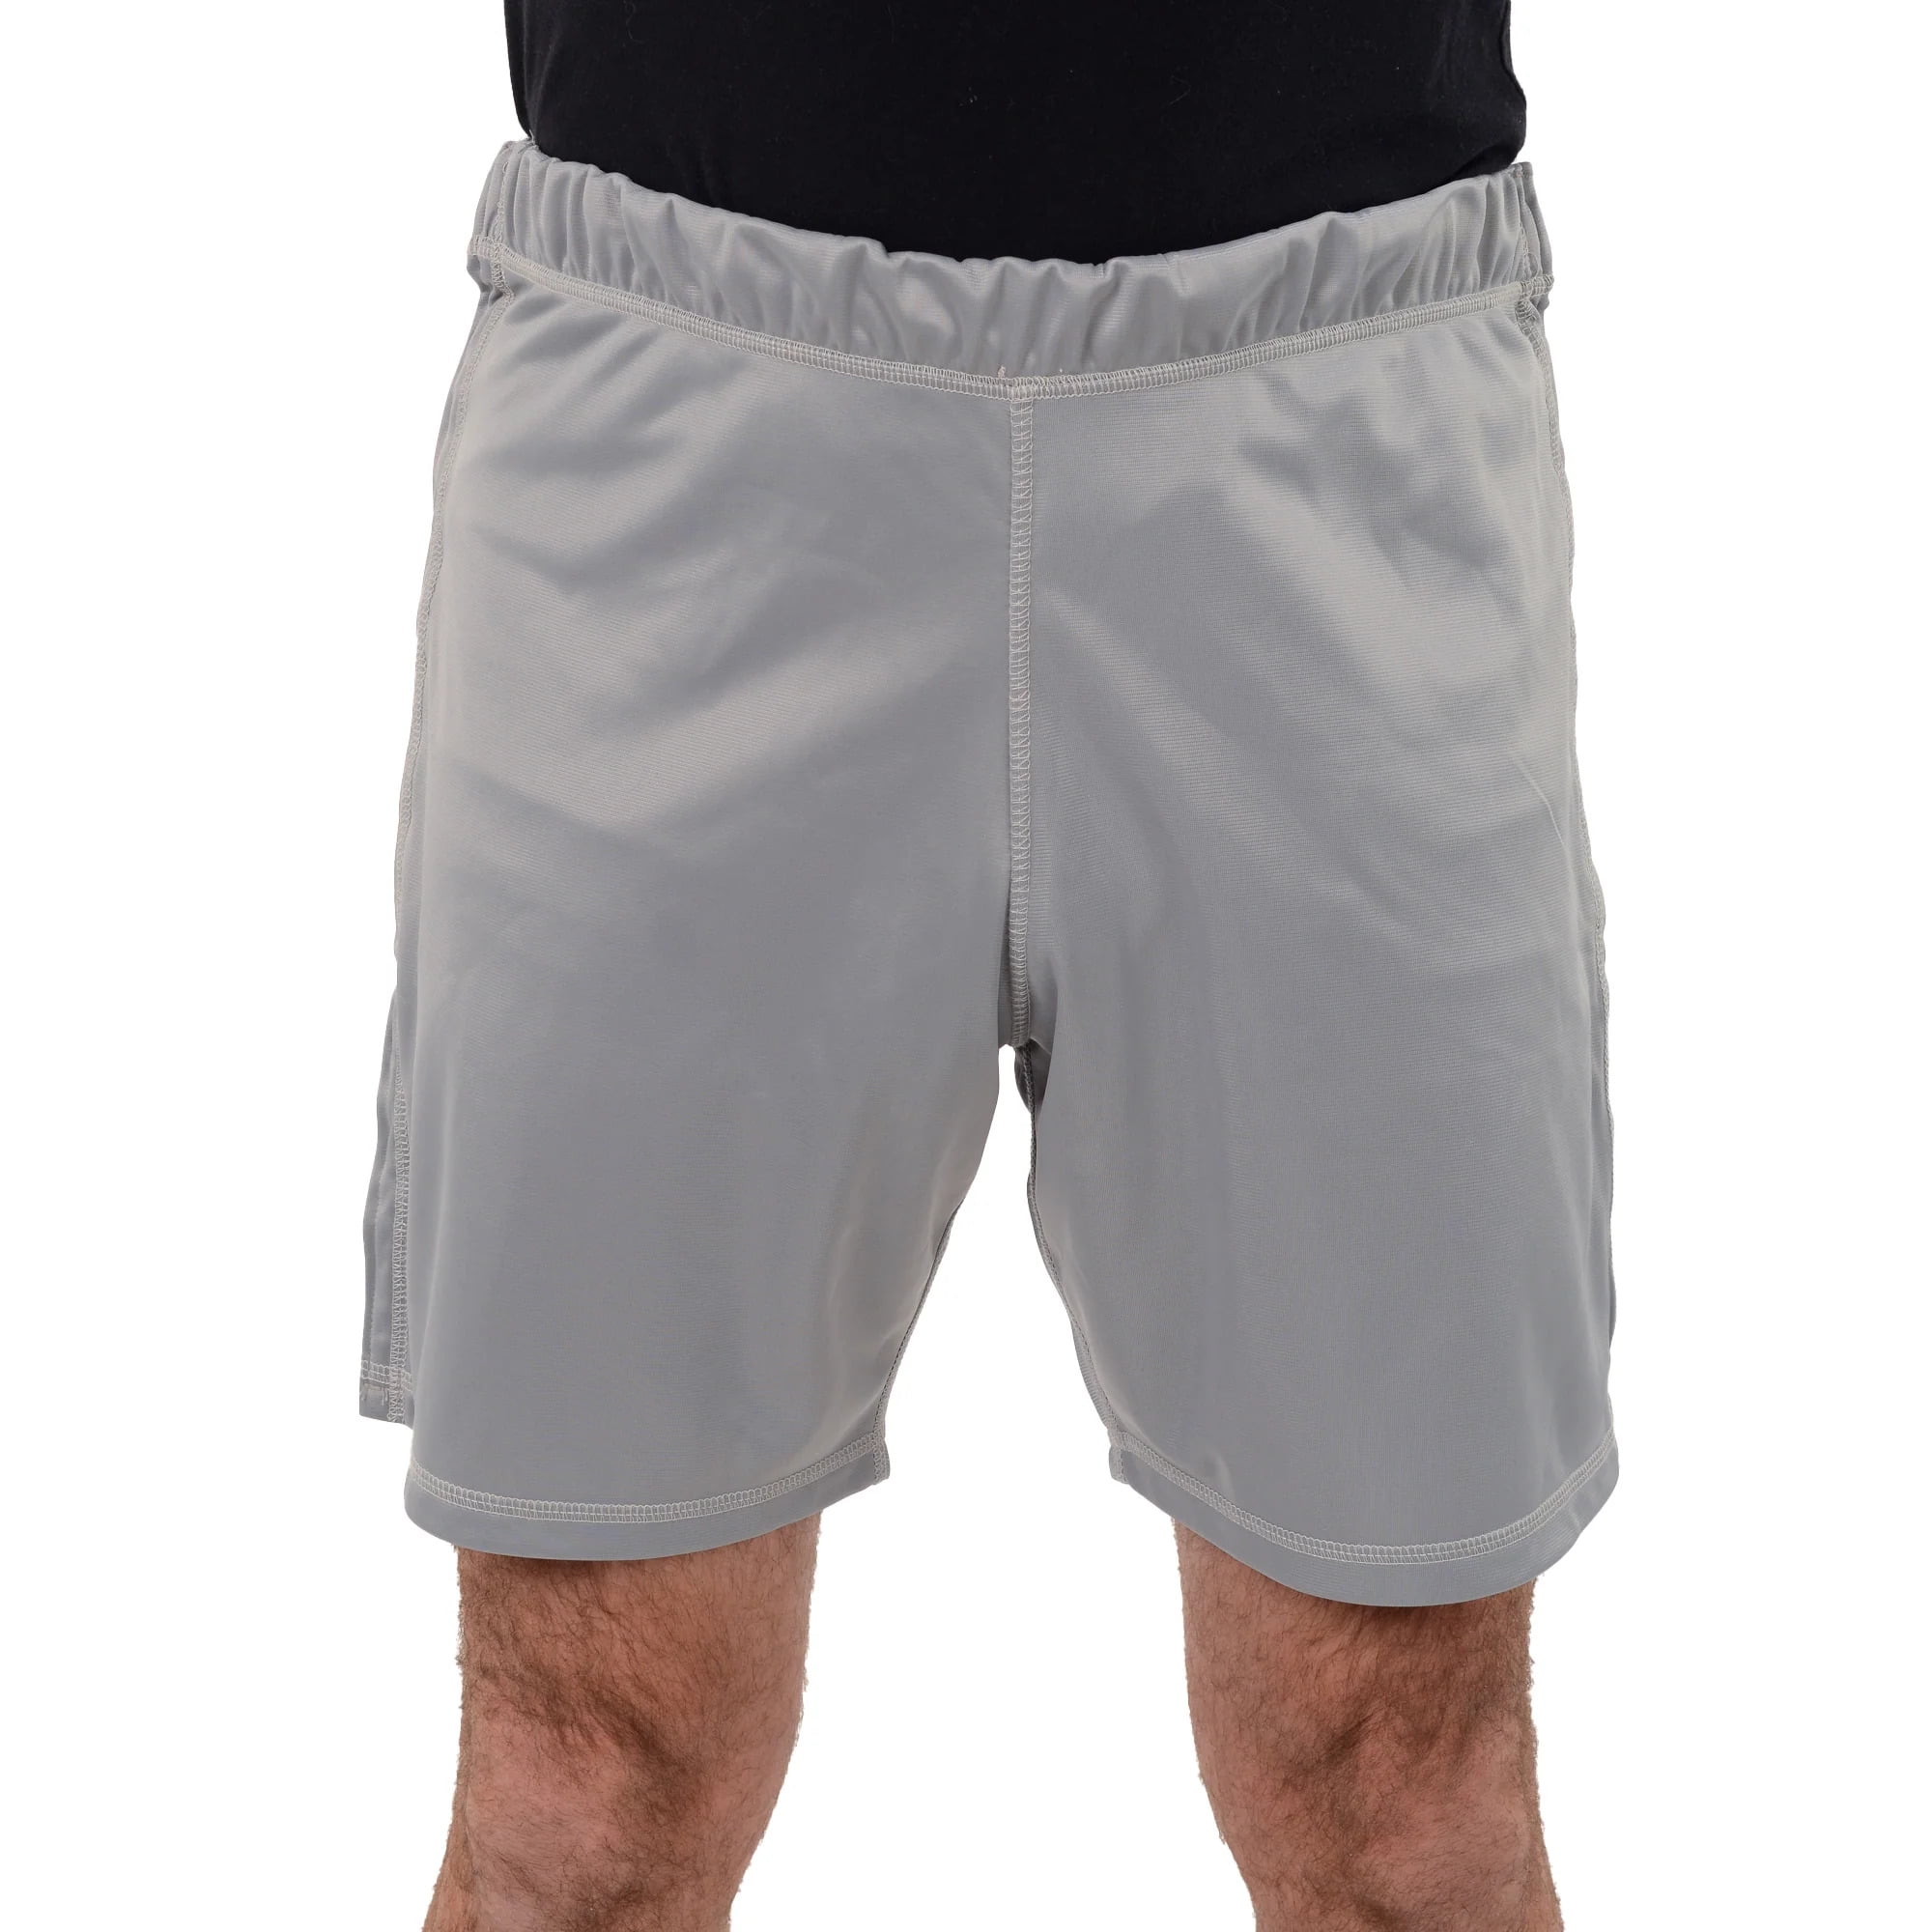 WRIVE Post Surgery Underwear Tearaway Shorts for Patients India